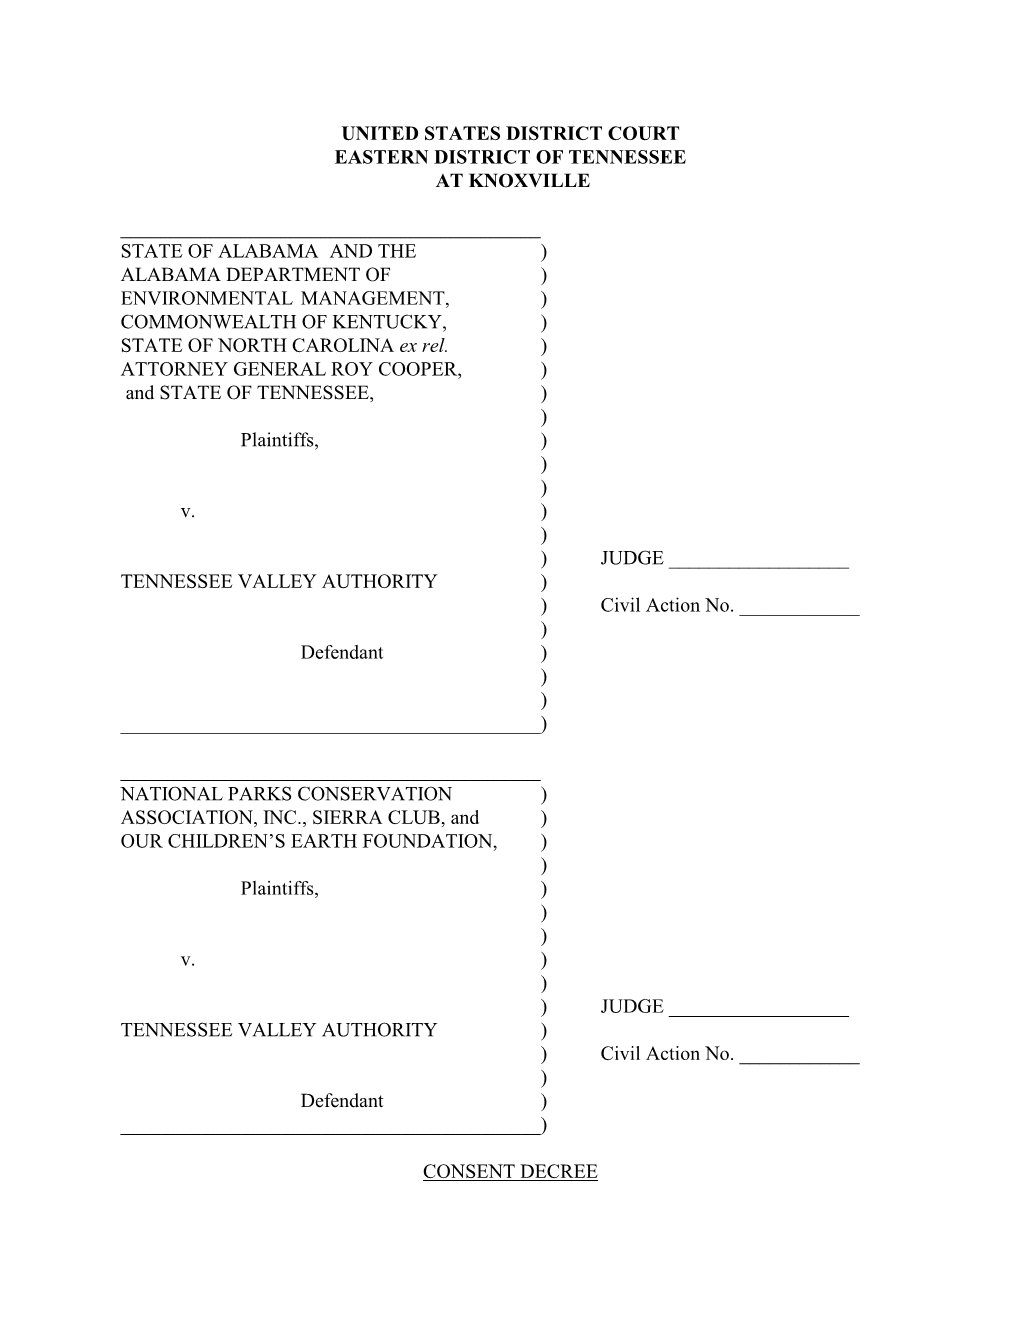 Consent Decree: Tennessee Valley Authority (Pdf)